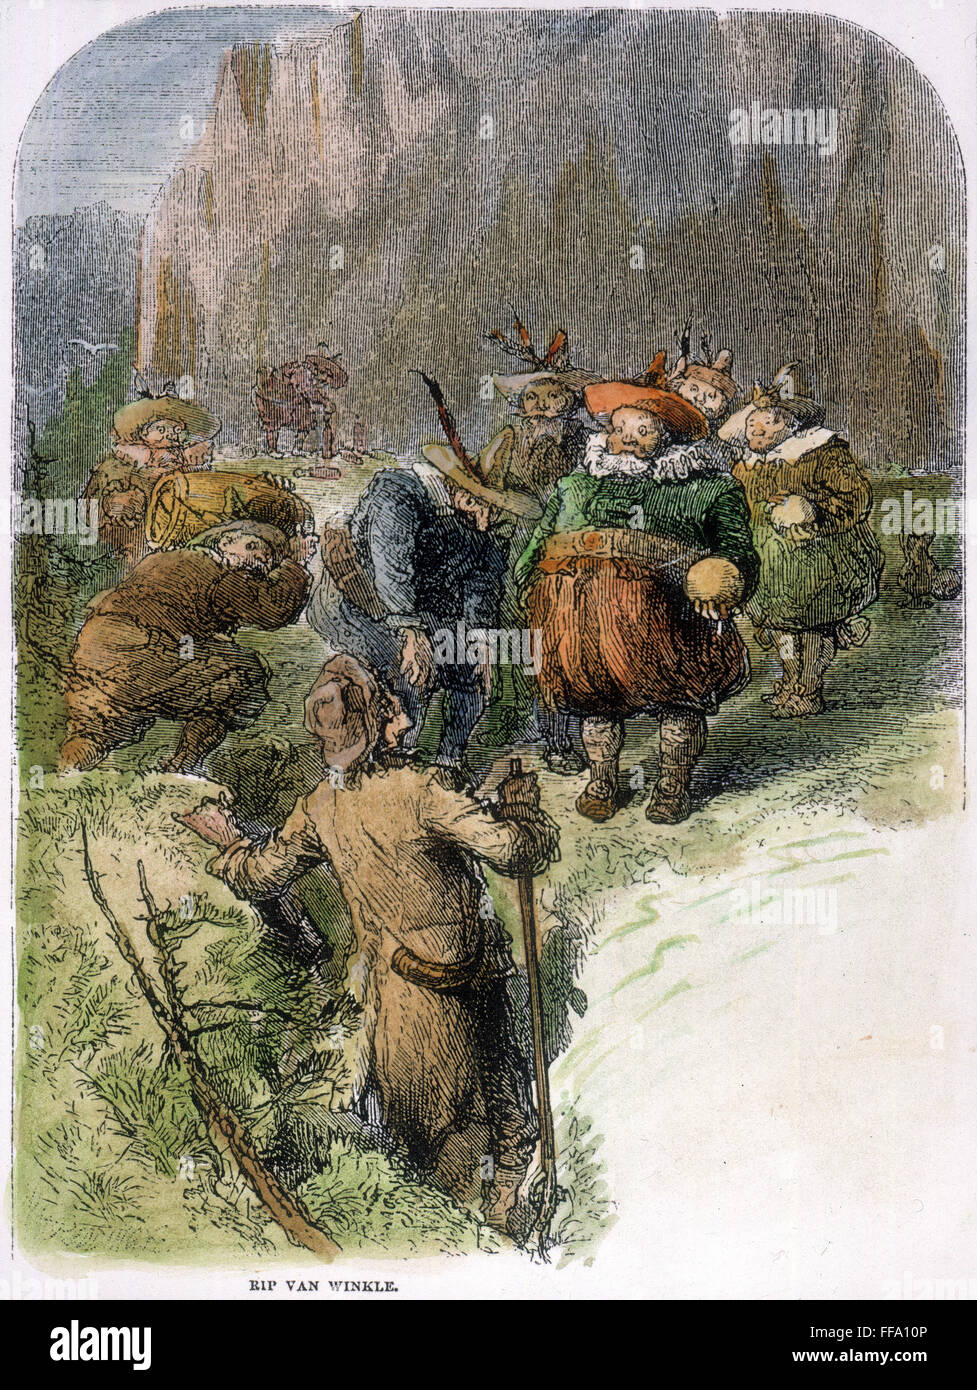 IRVING: RIP VAN WINKLE. /nRip Van Winkle meets the dwarfs in the Catskill Mountains. Wood engraving, American, 1876, depicting a scene from the Washington Irving story first published in 1819. Stock Photo